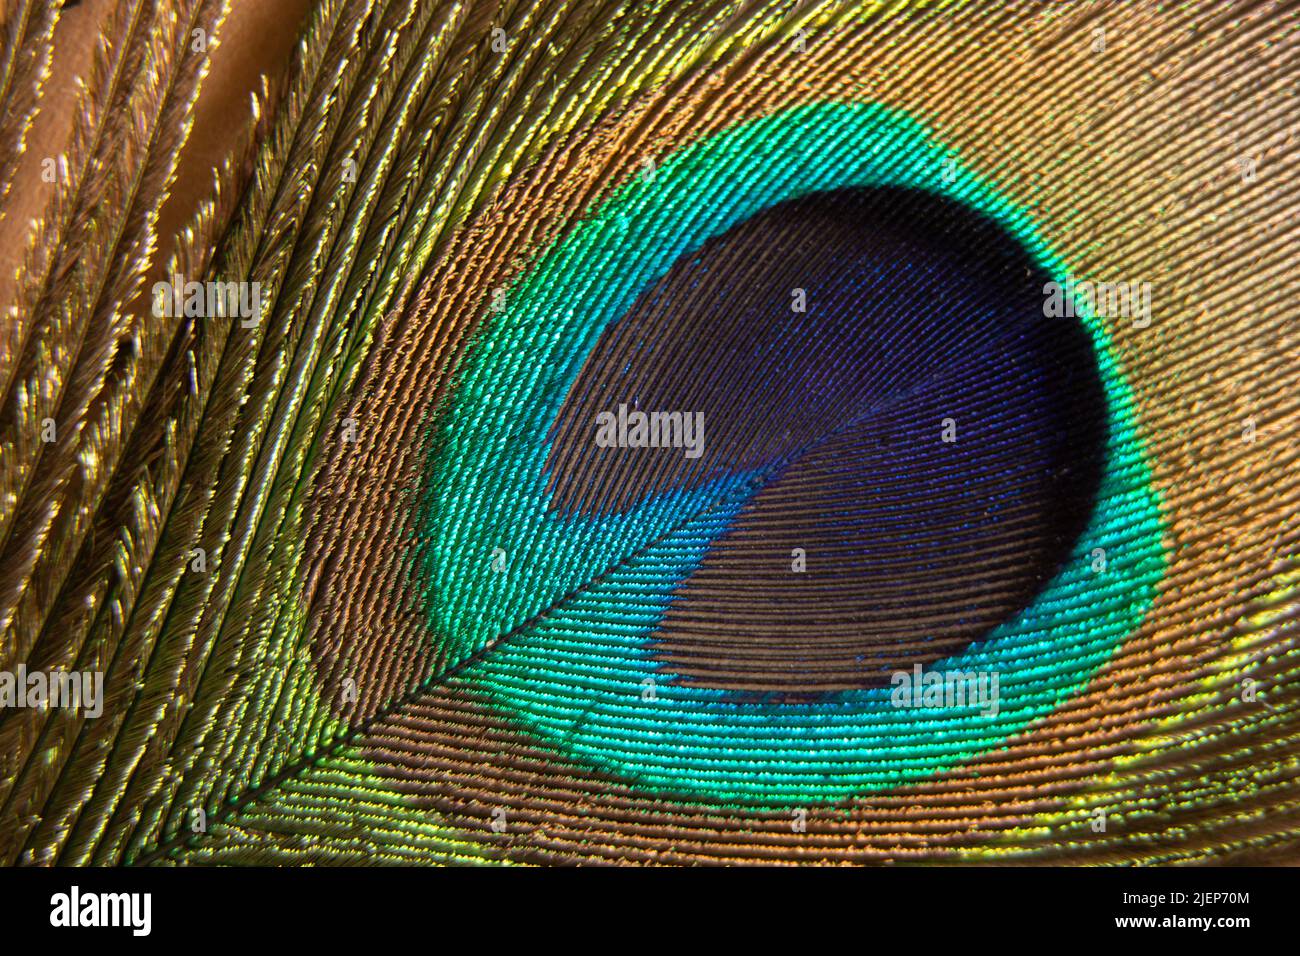 peacock feather close up macro photo, peacock feather isolated Stock Photo